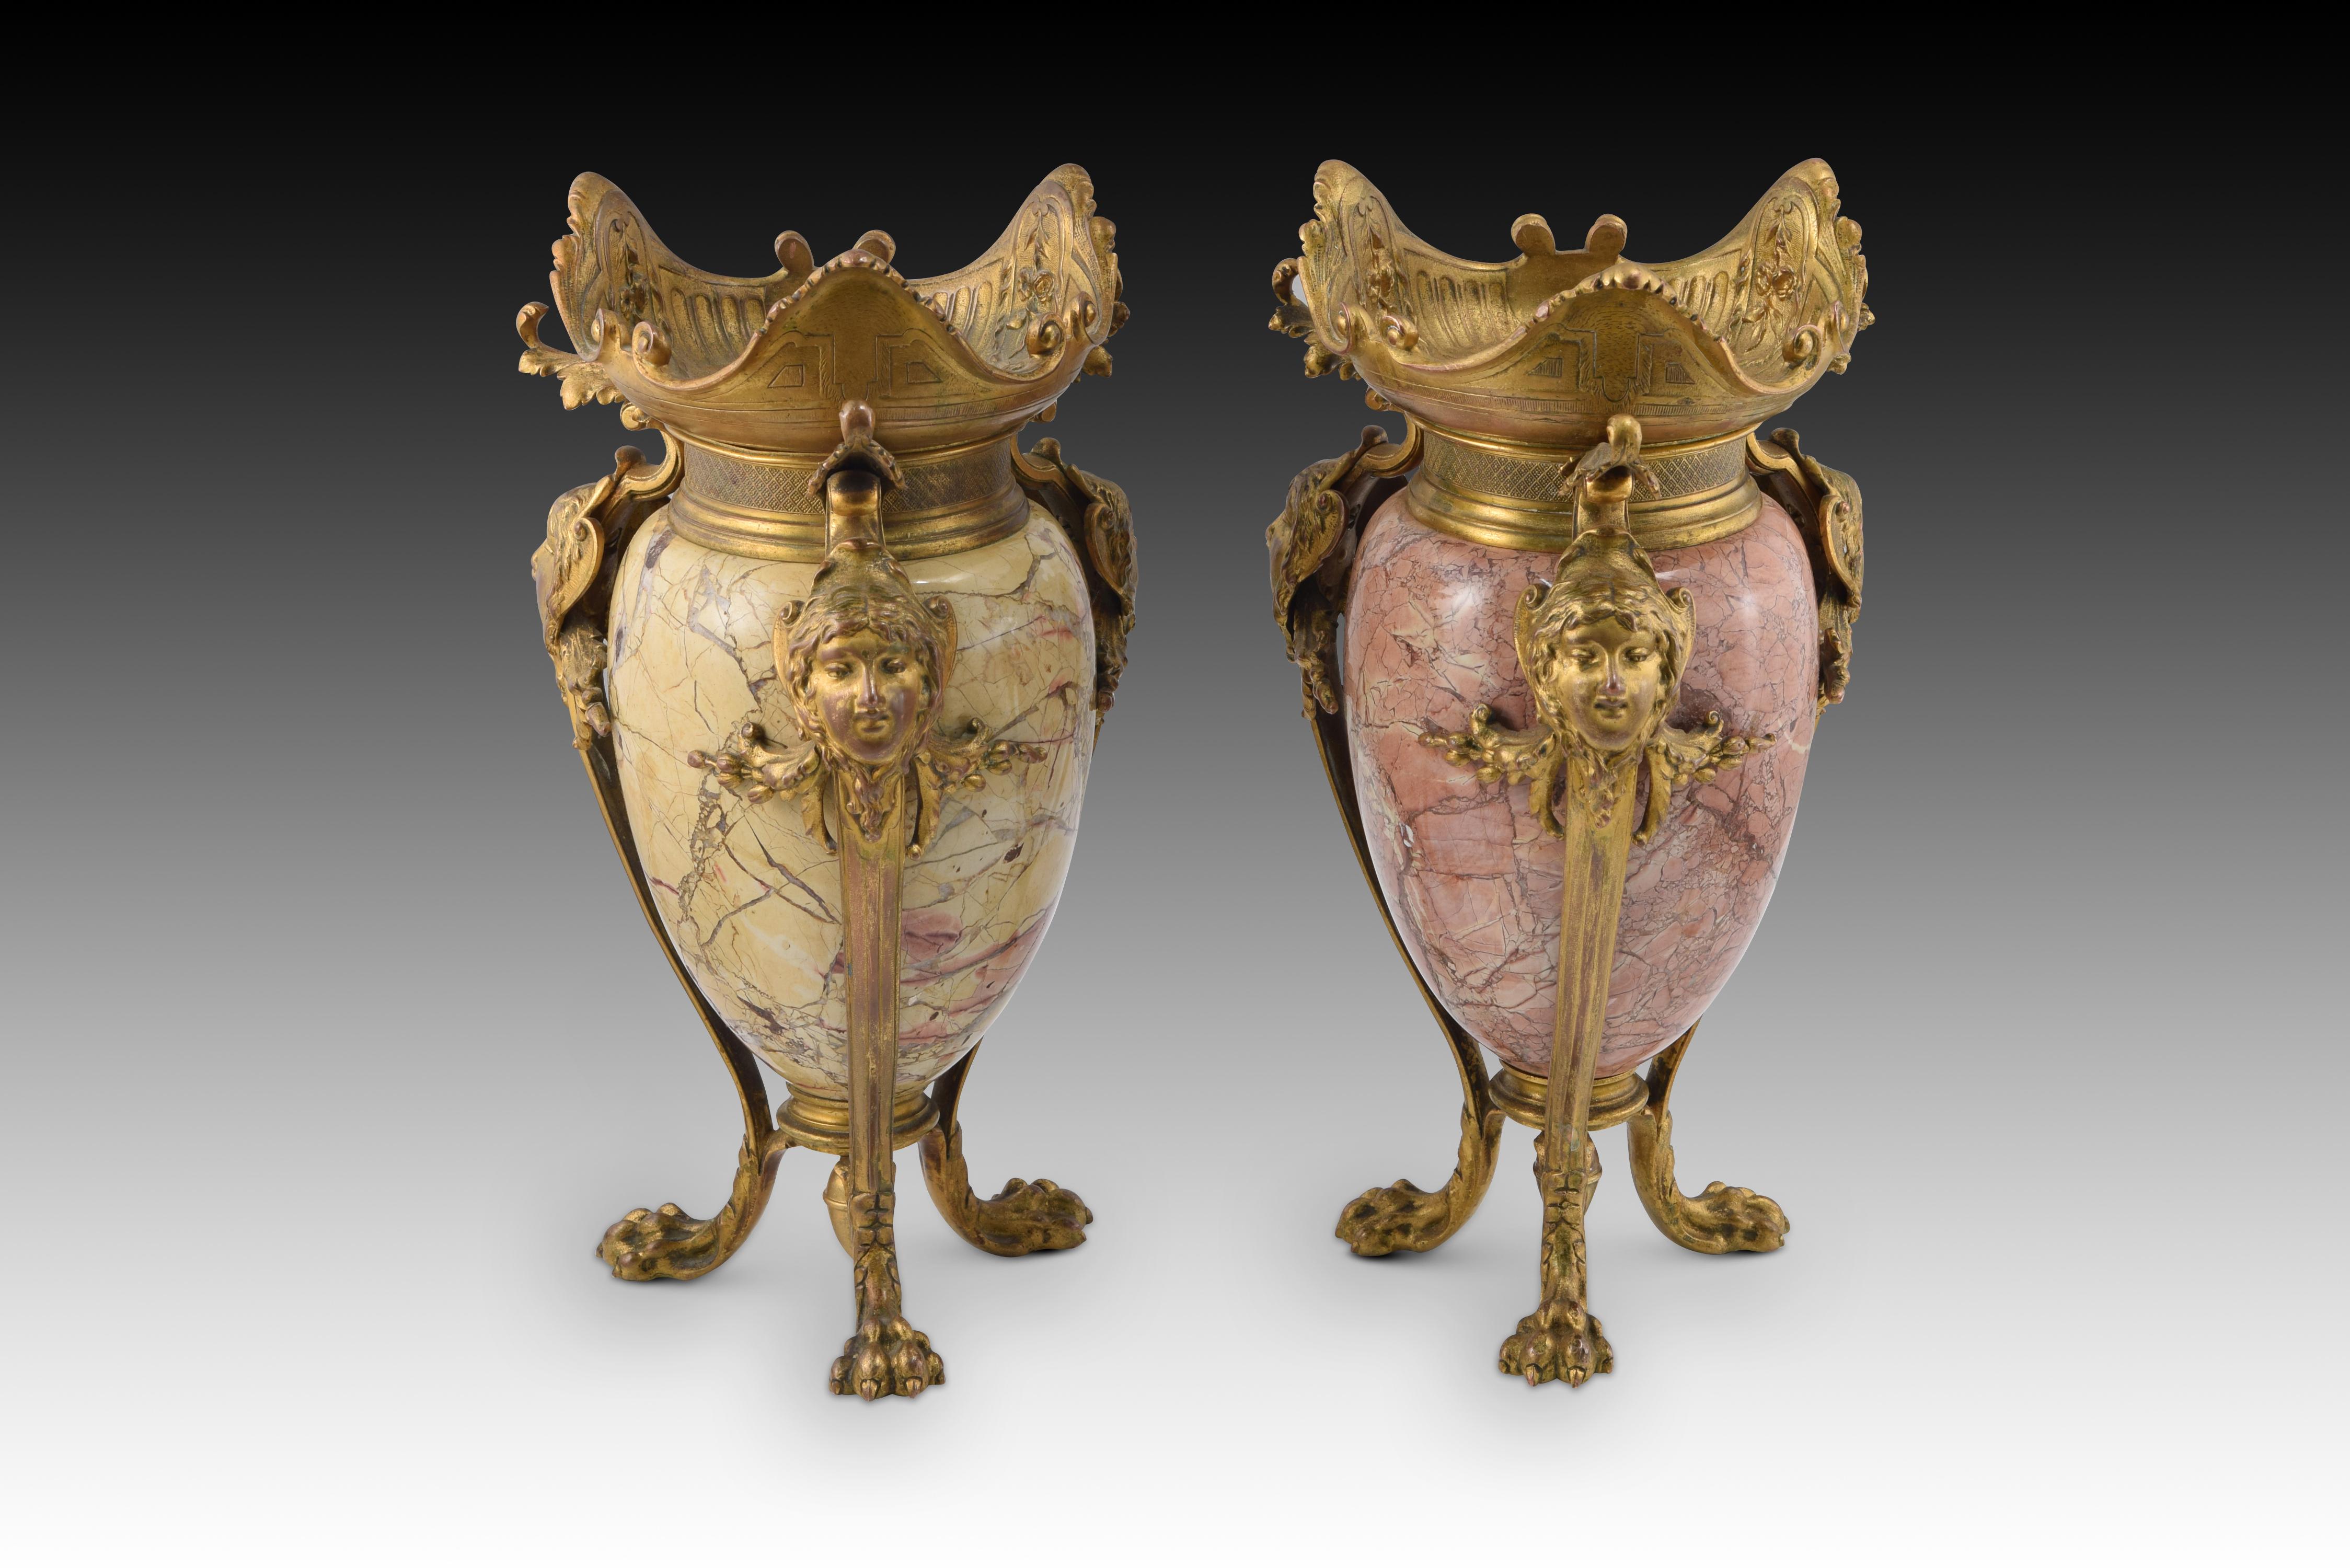 French Pair of Vases. Gilded Bronze, Veined Marble. France, Late 19th Century